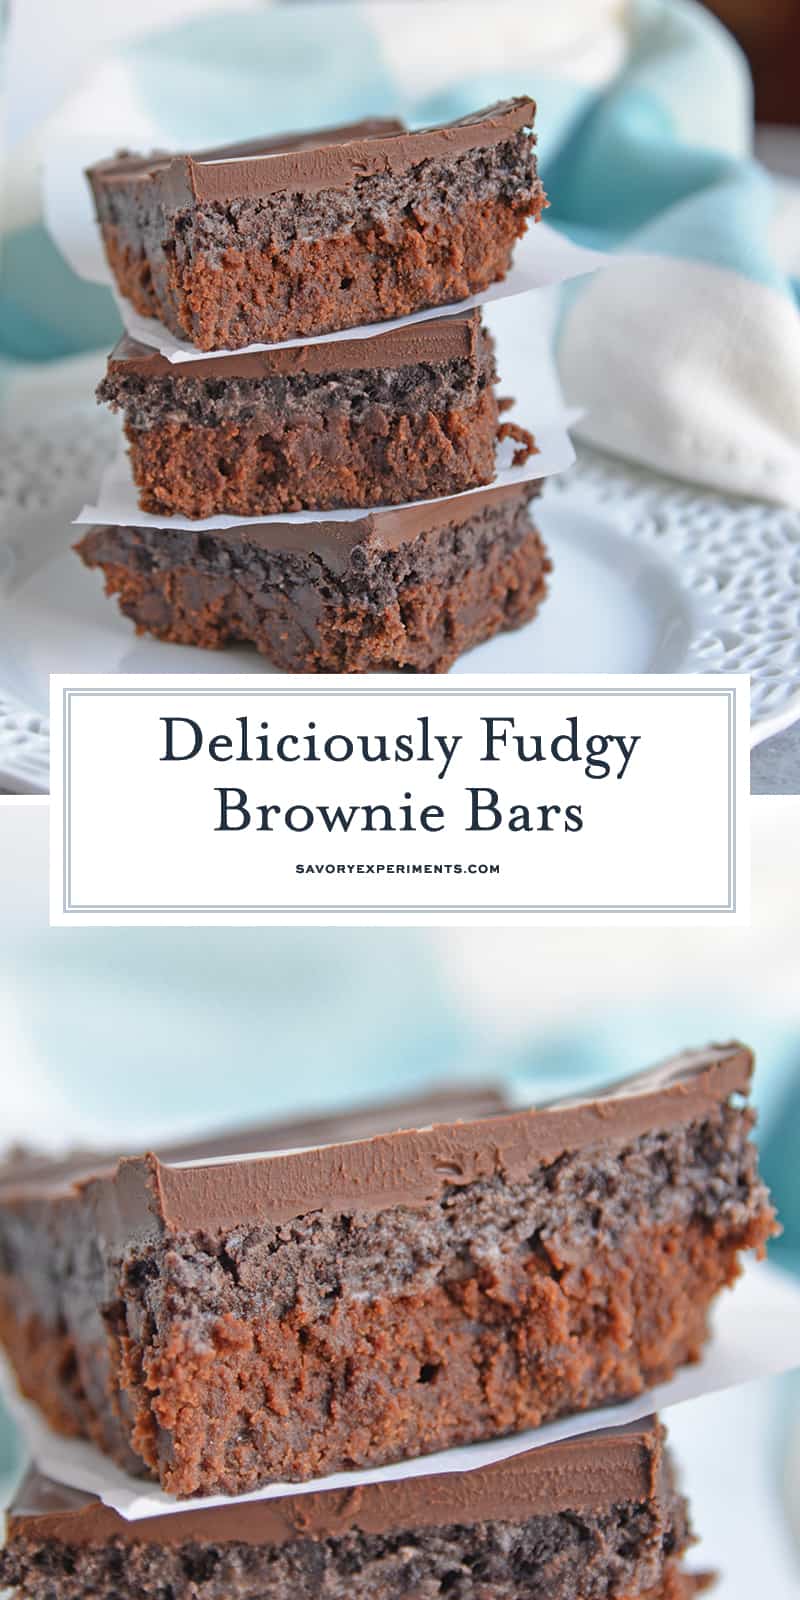 Fudgy Brownie Bars are an easy dessert recipe with layers of brownie, cookie and chocolate ganache, the ultimate chocolate lovers dream! #fudgybrownies #cookiebrownies www.savoryexperiments.com